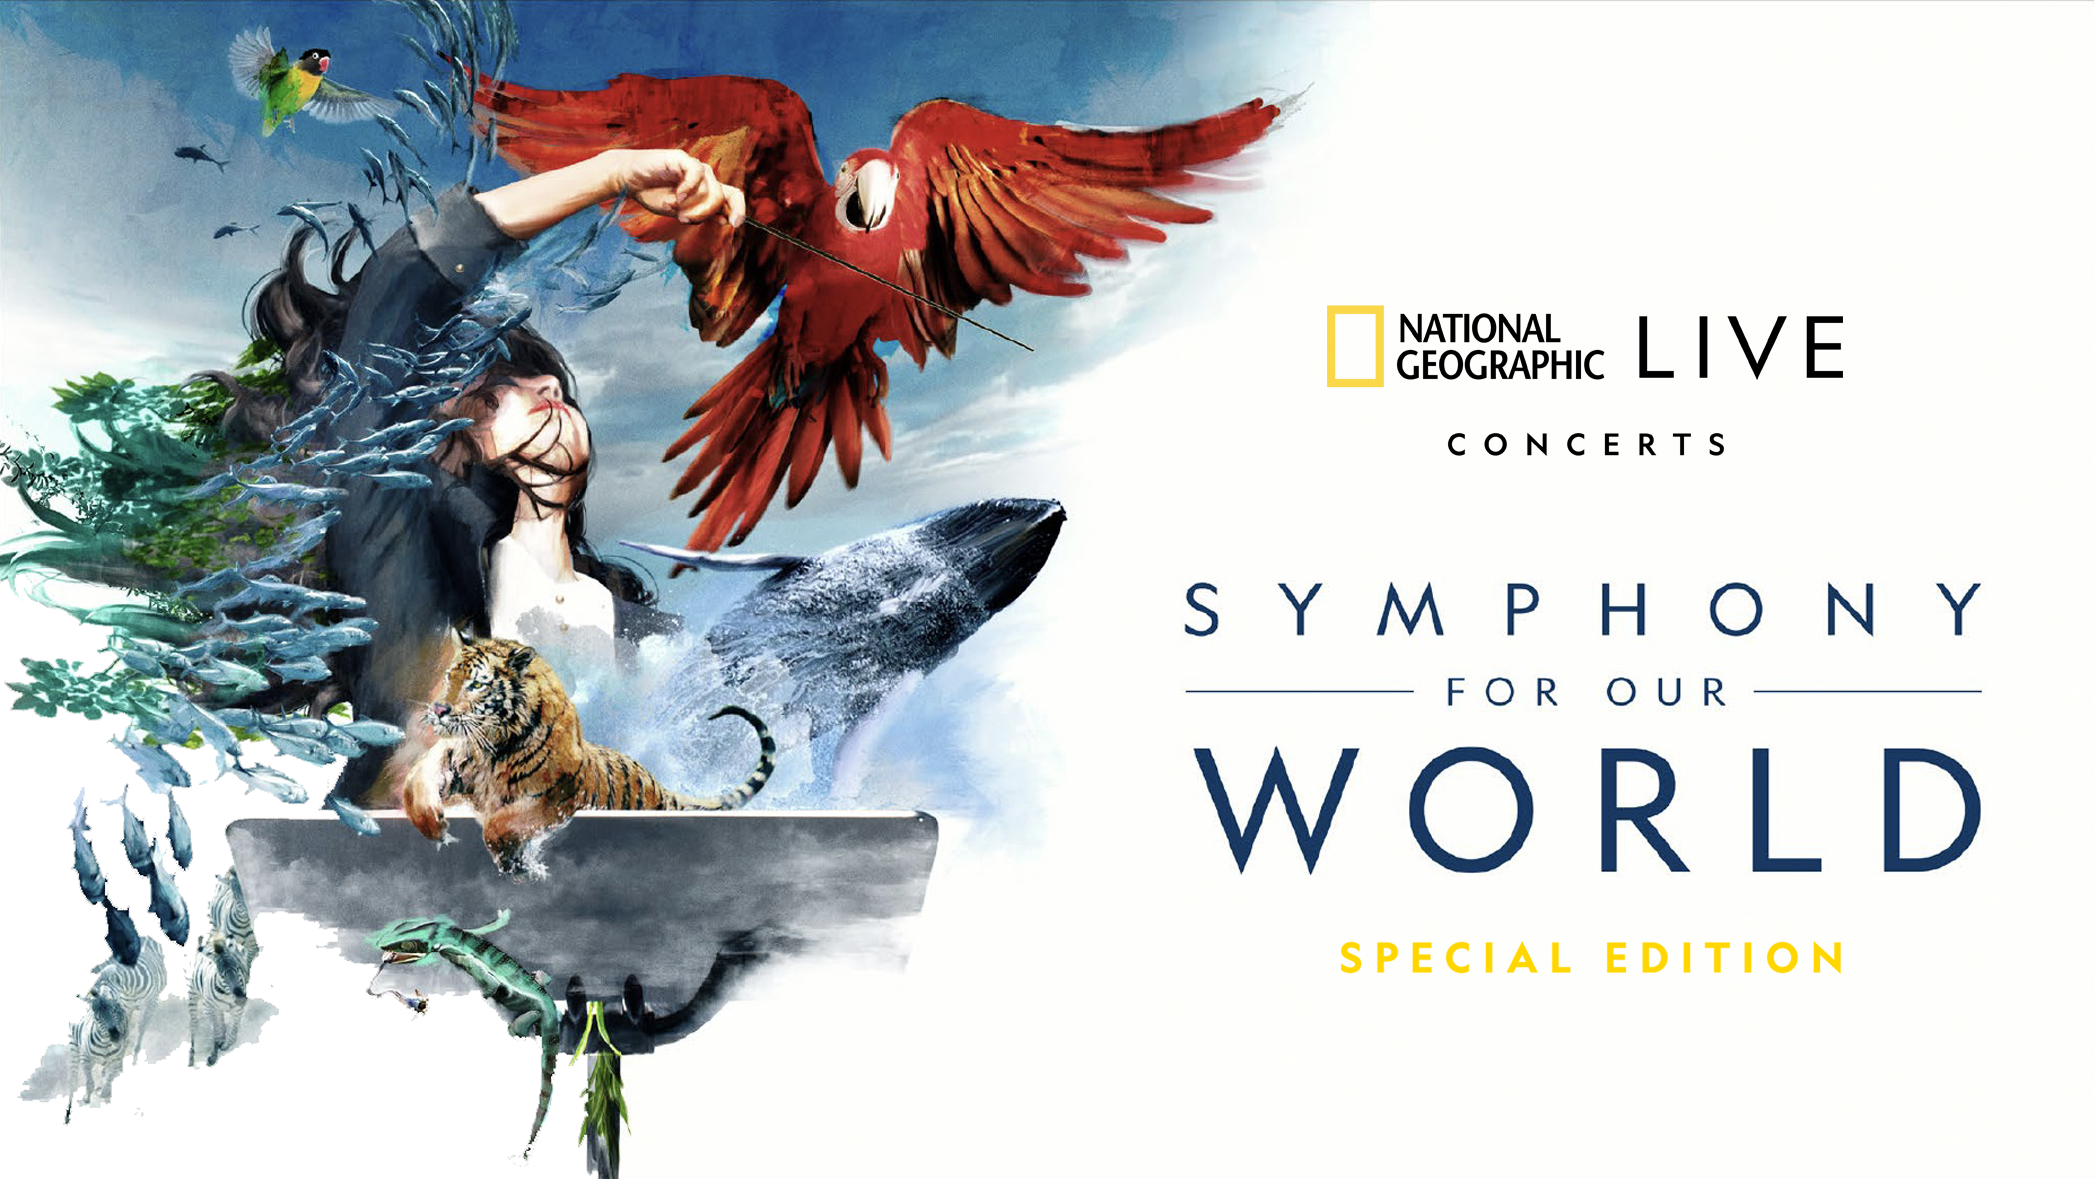 New National Geographic ‘Symphony For Our World’ experience (special edition) starts tomorrow at the Studio Theater